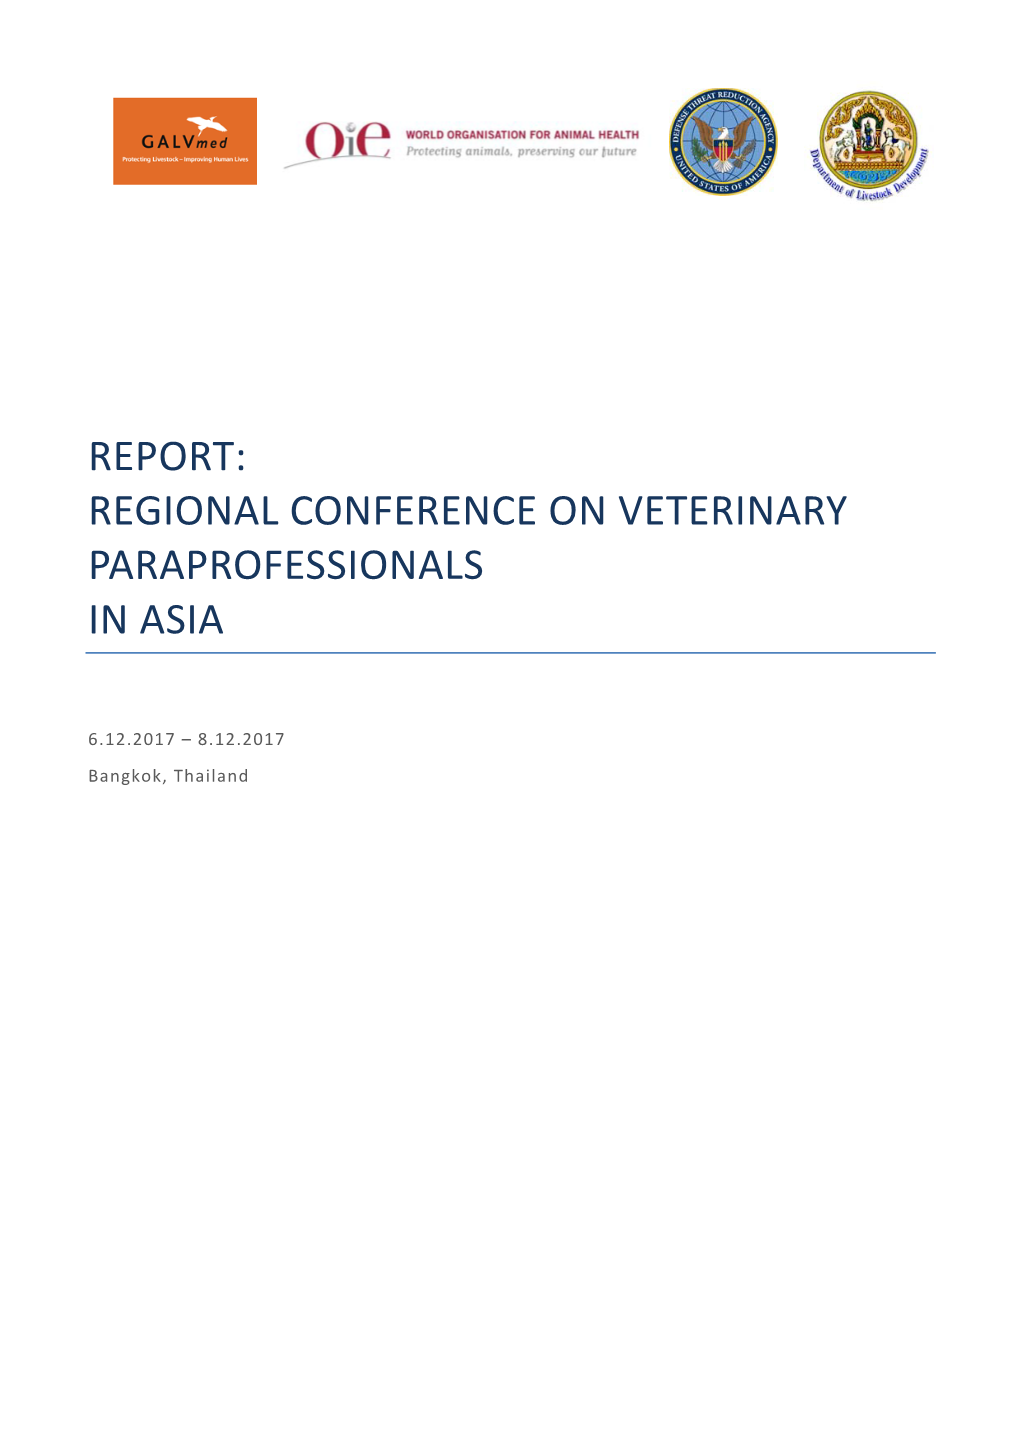 Regional Conference on Veterinary Paraprofessionals in Asia